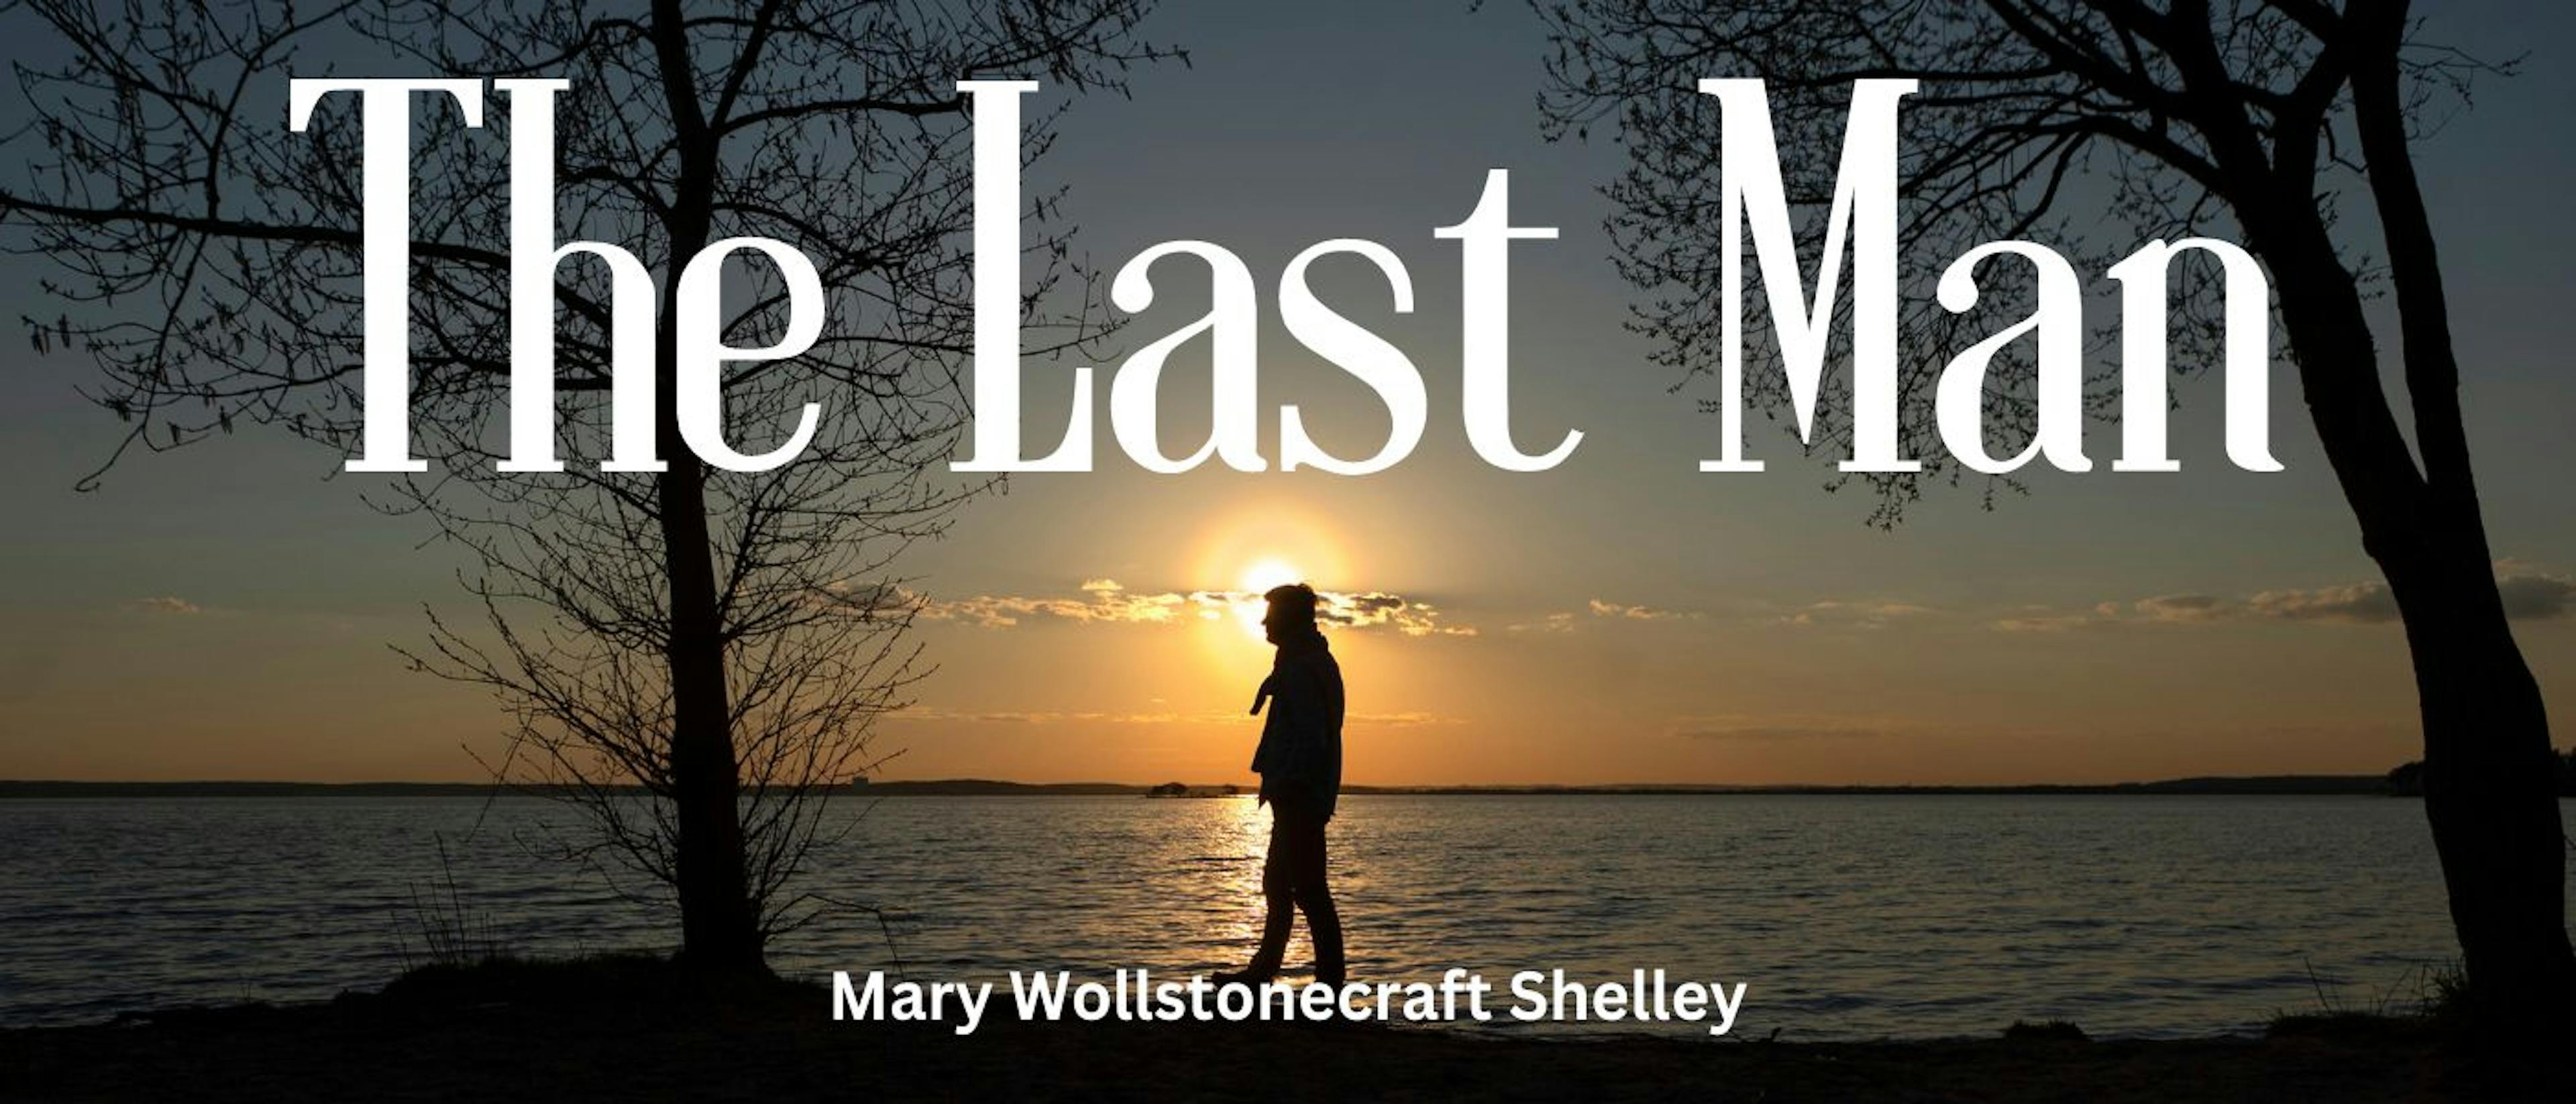 featured image - The Last Man by Mary Wollstonecraft Shelley - Table of Links